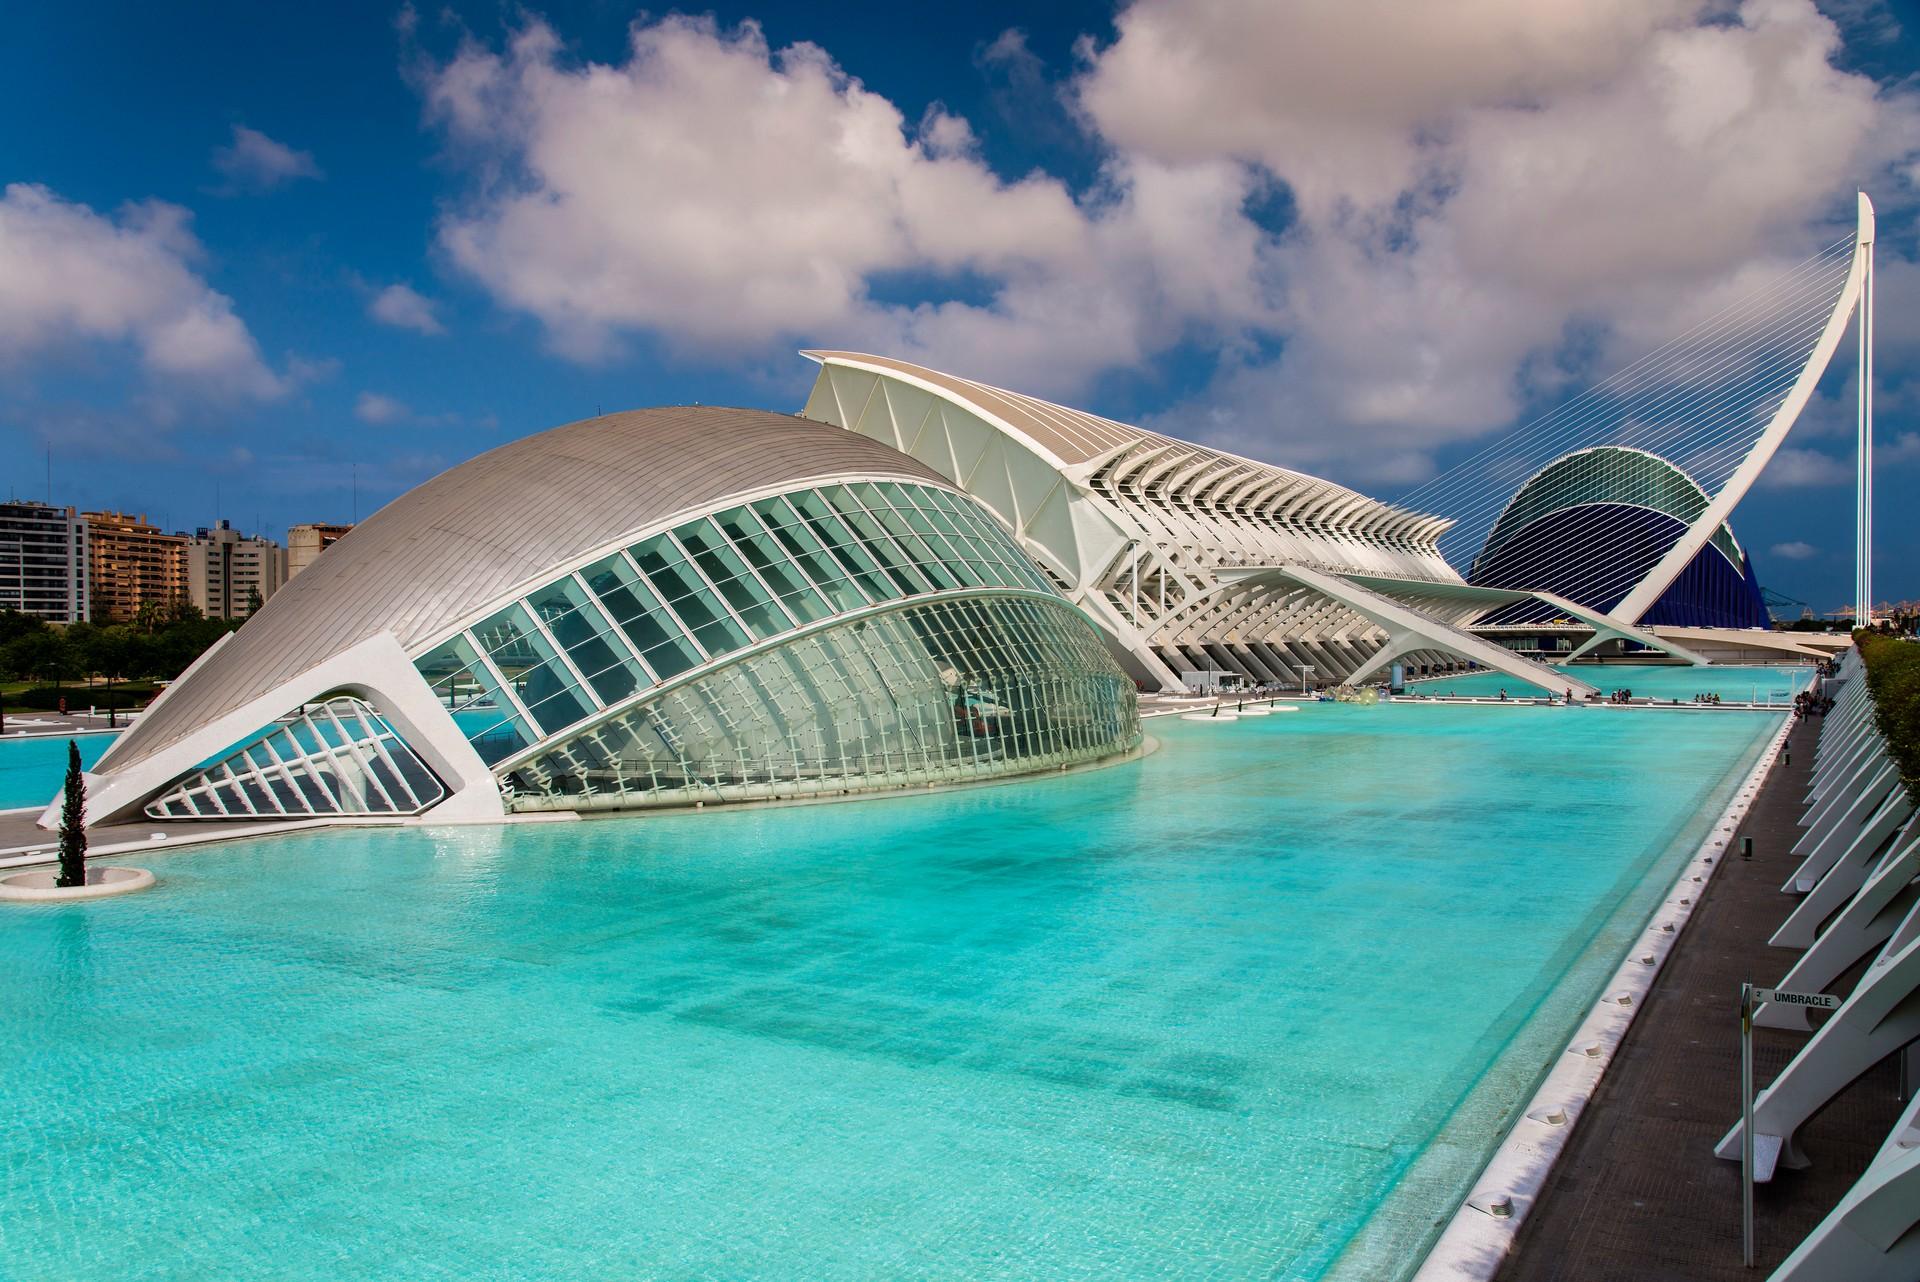 Architecture in Valencia on a sunny day with some clouds